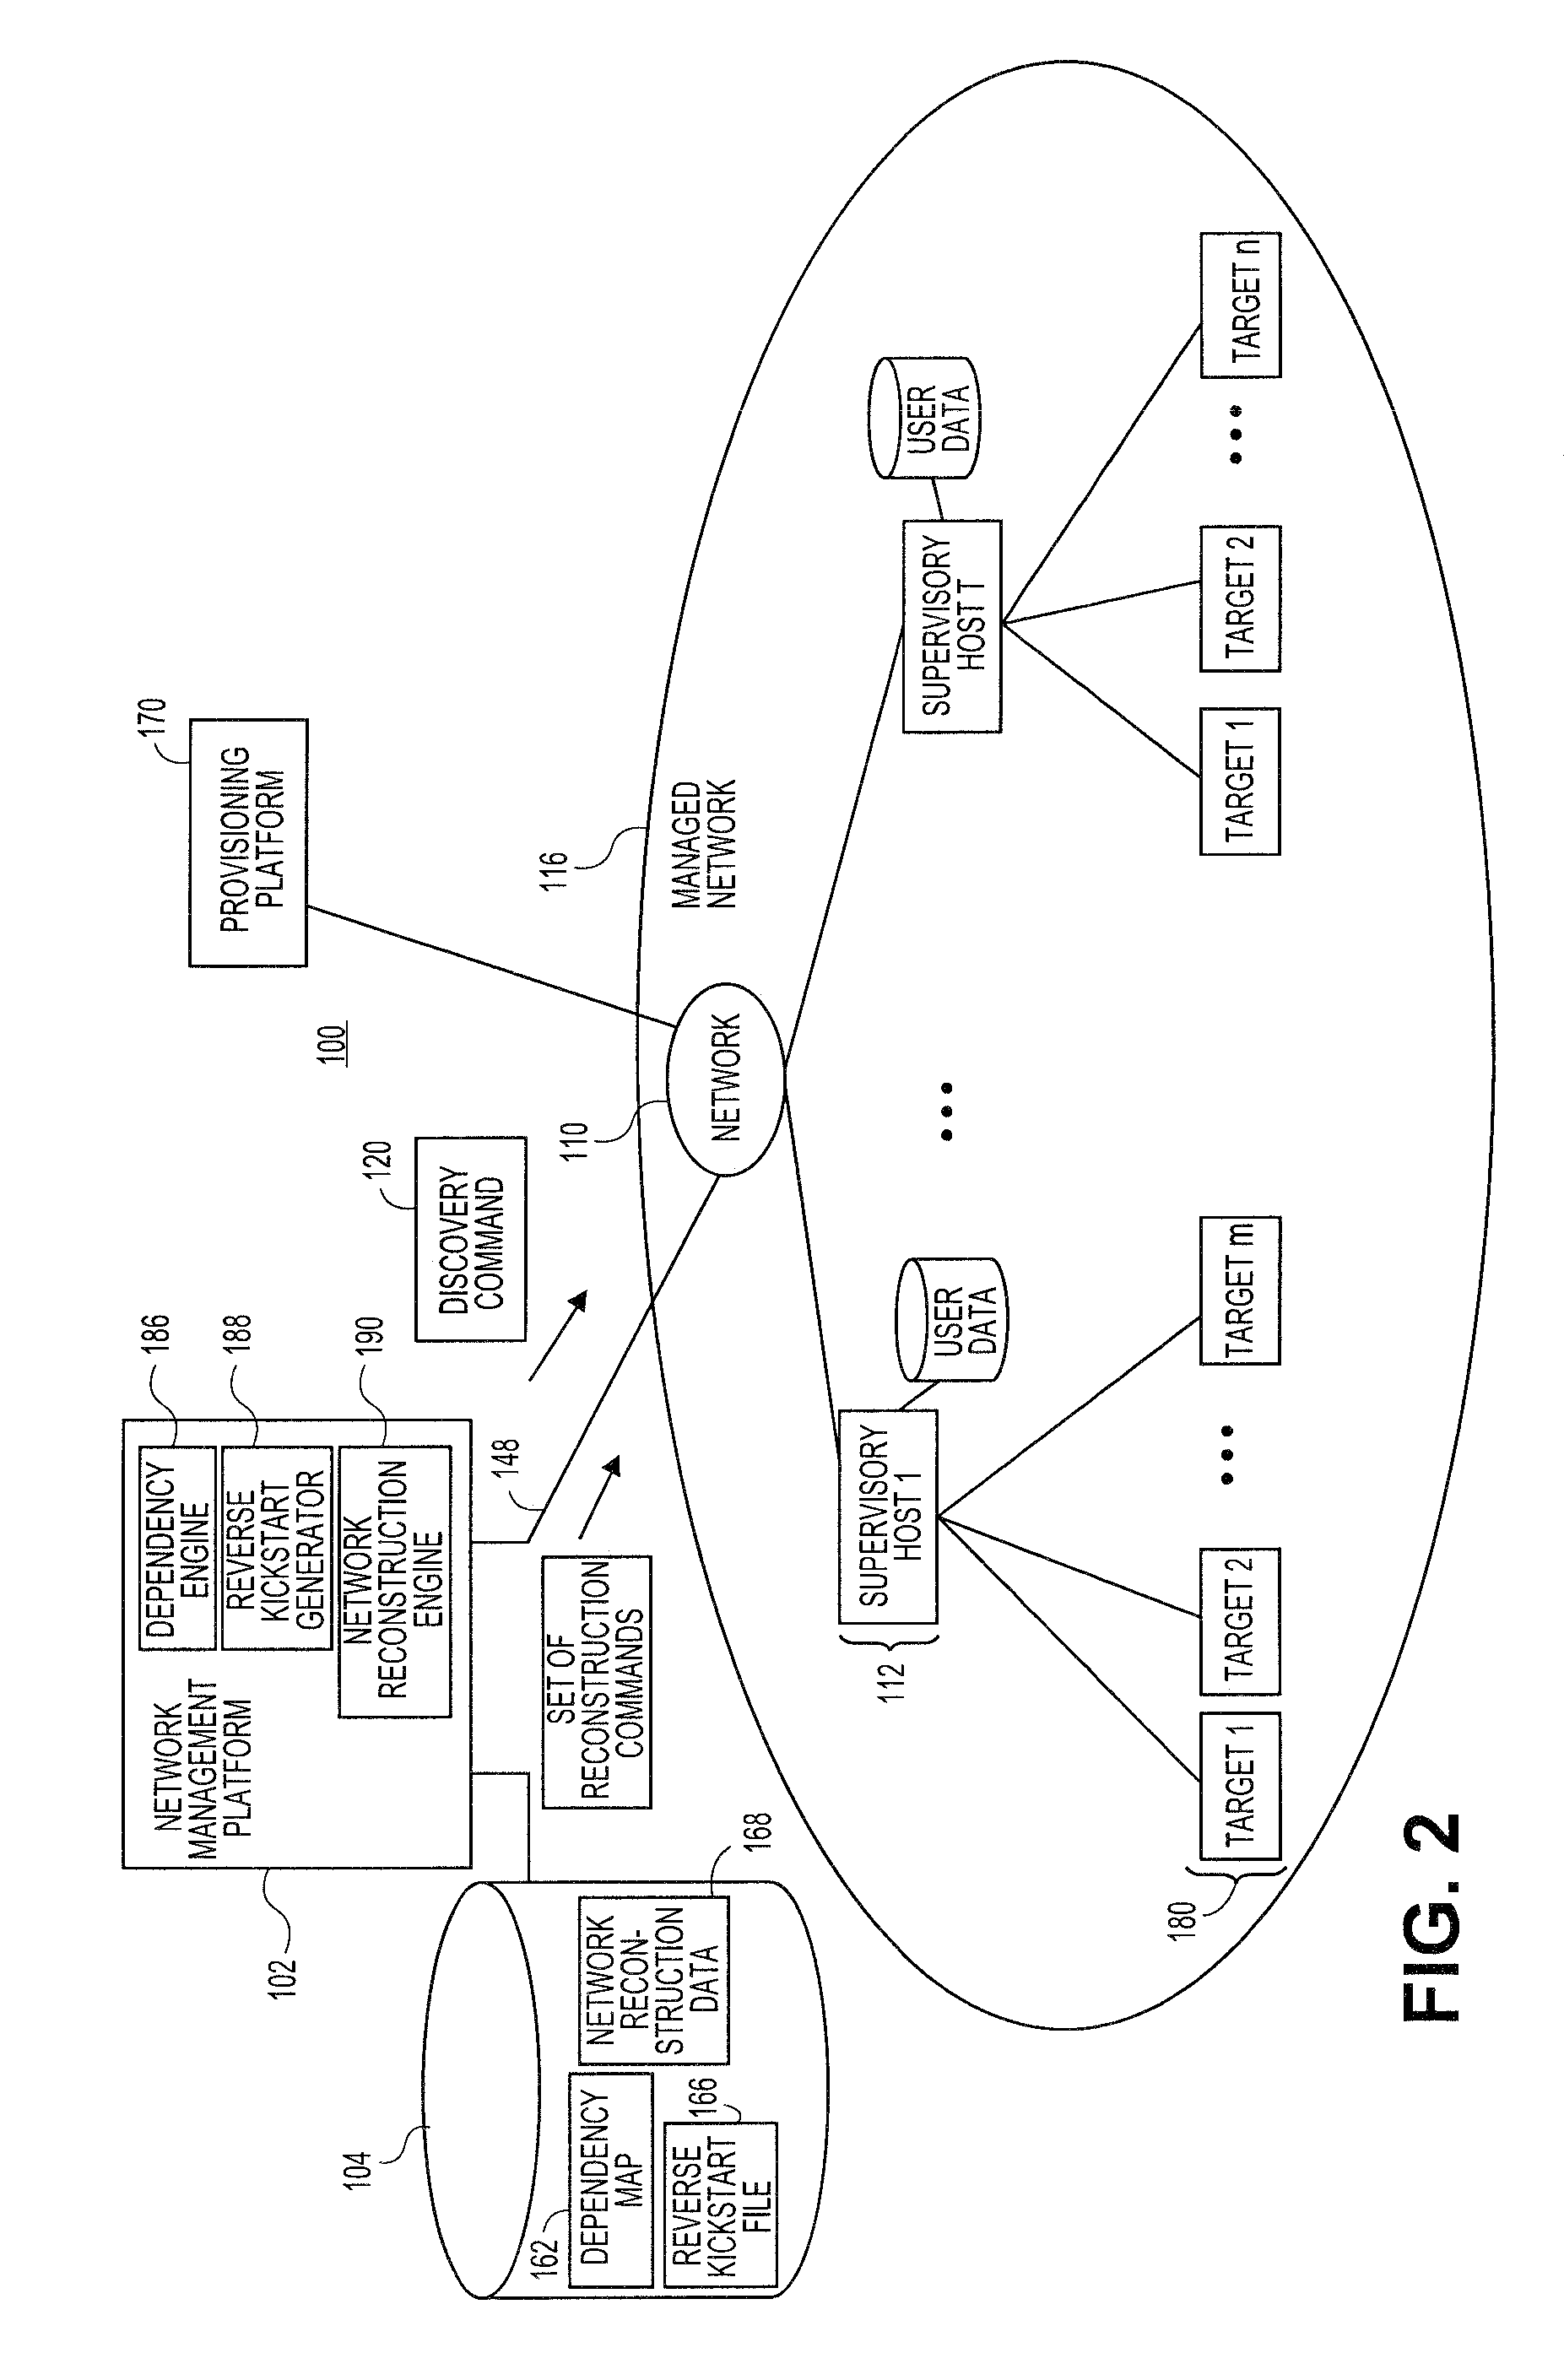 Systems and methods for generating reverse installation file for network restoration